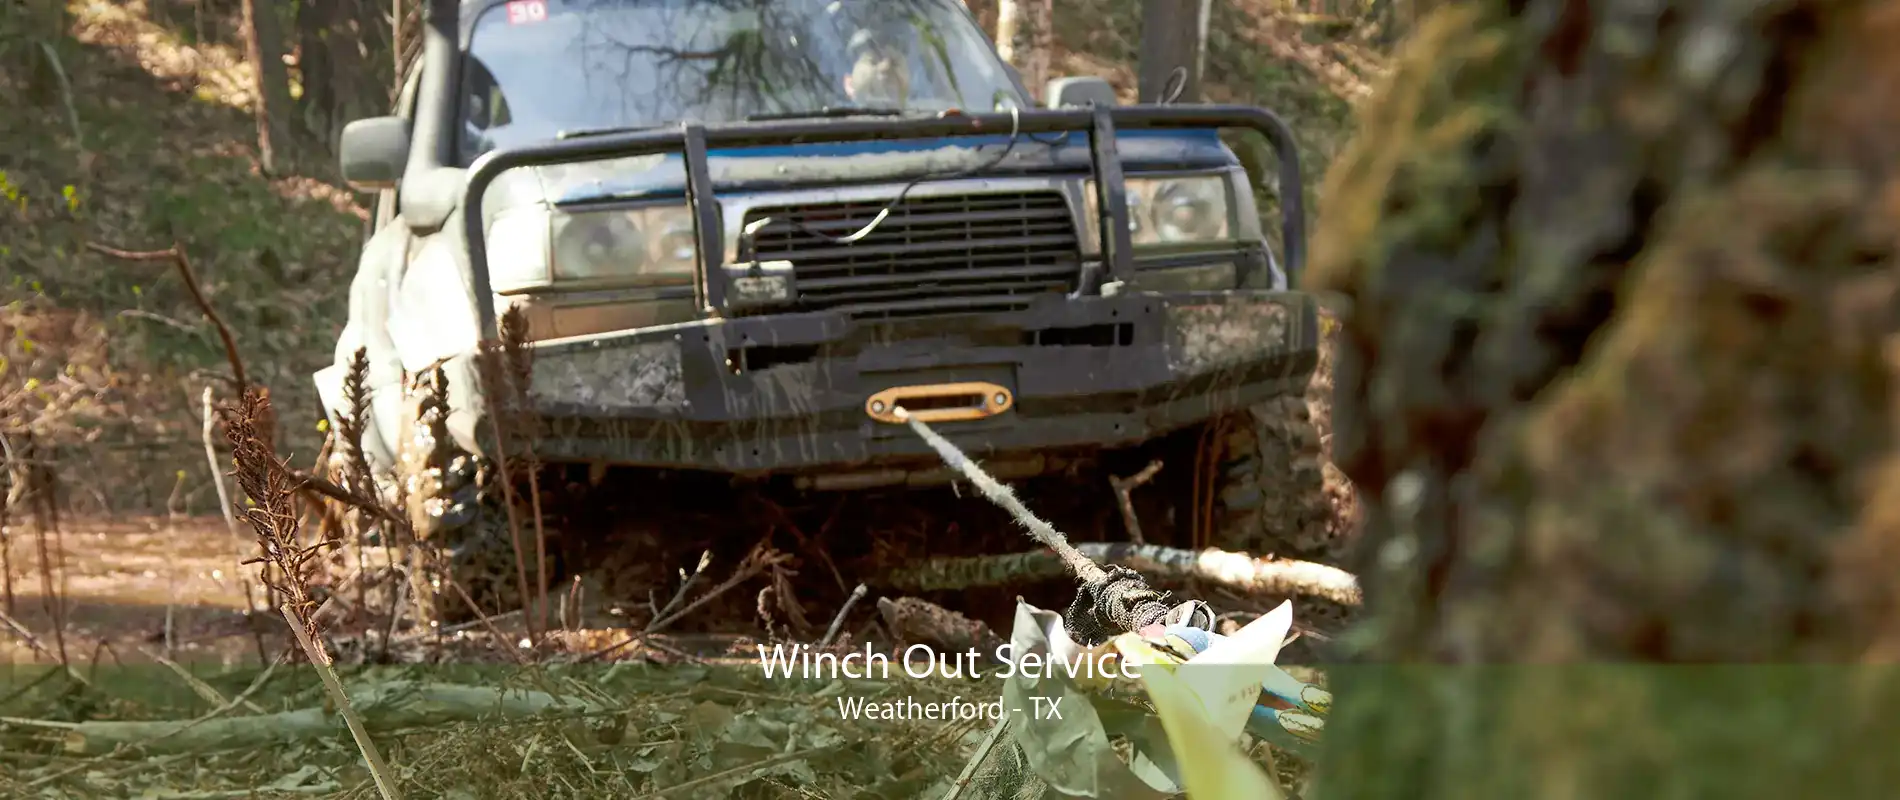 Winch Out Service Weatherford - TX